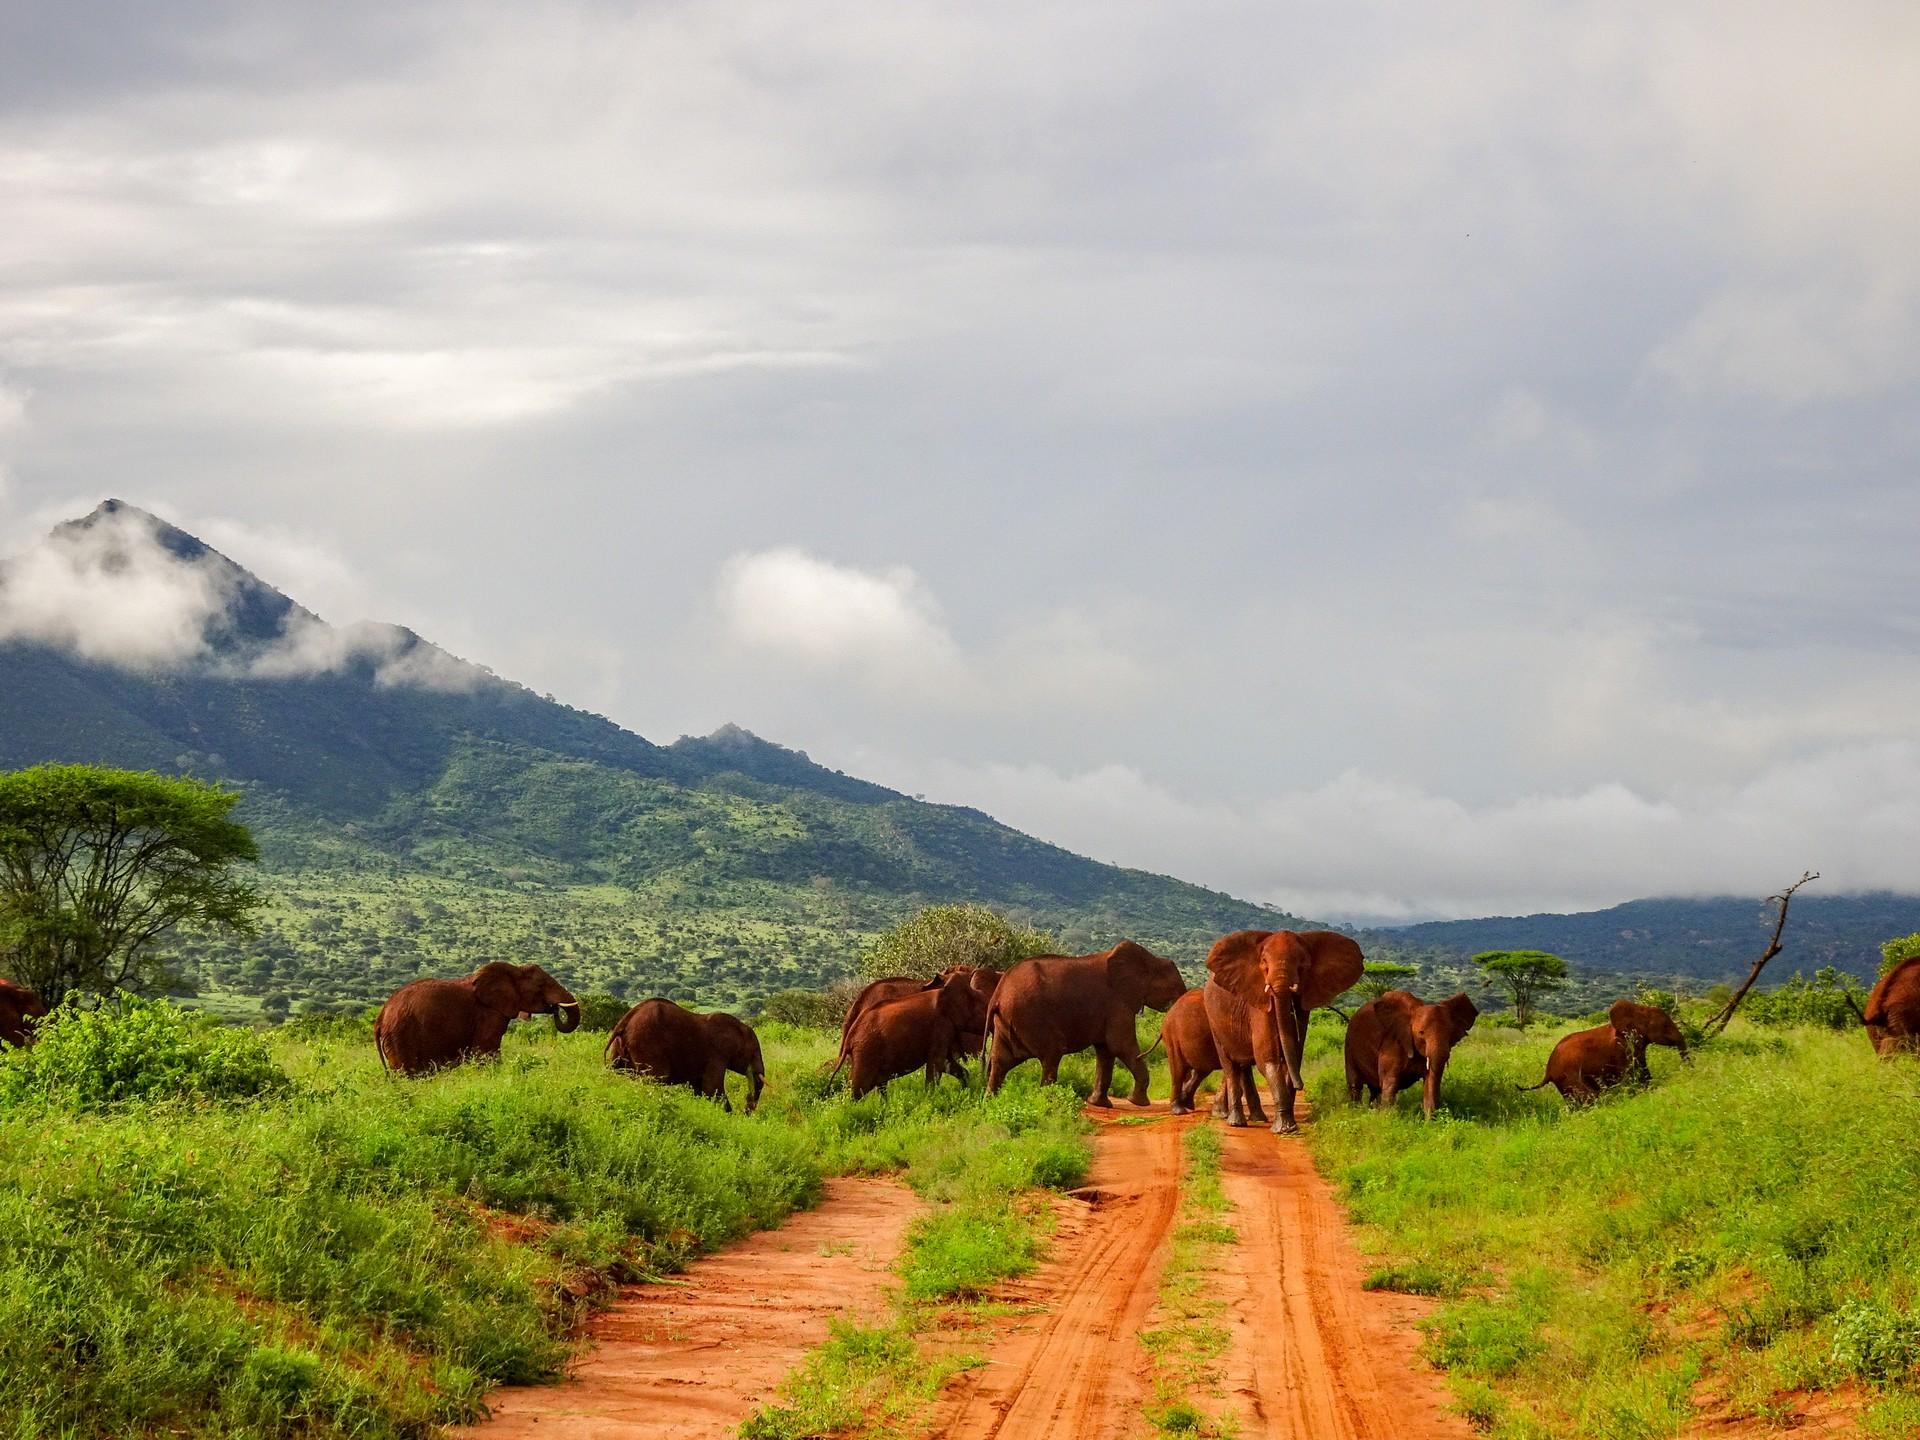 Countryside in Tsavo on a day with cloudy weather